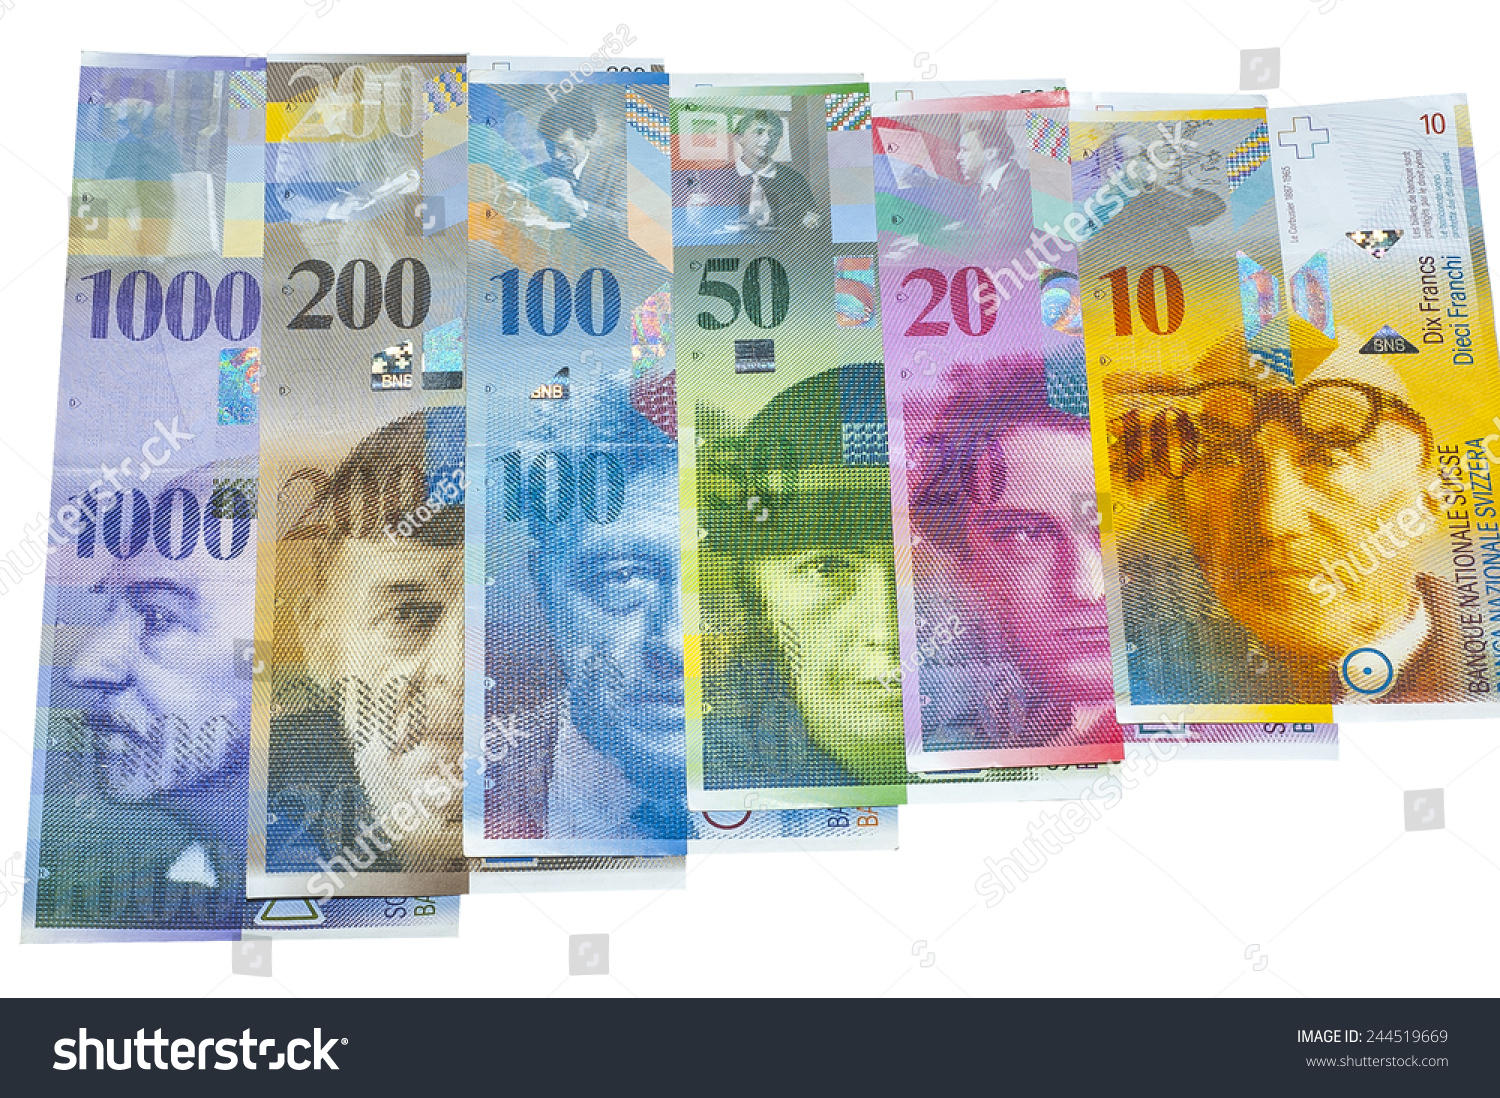 swiss-francs-money-and-currency-of-switzerland-stock-photo-244519669